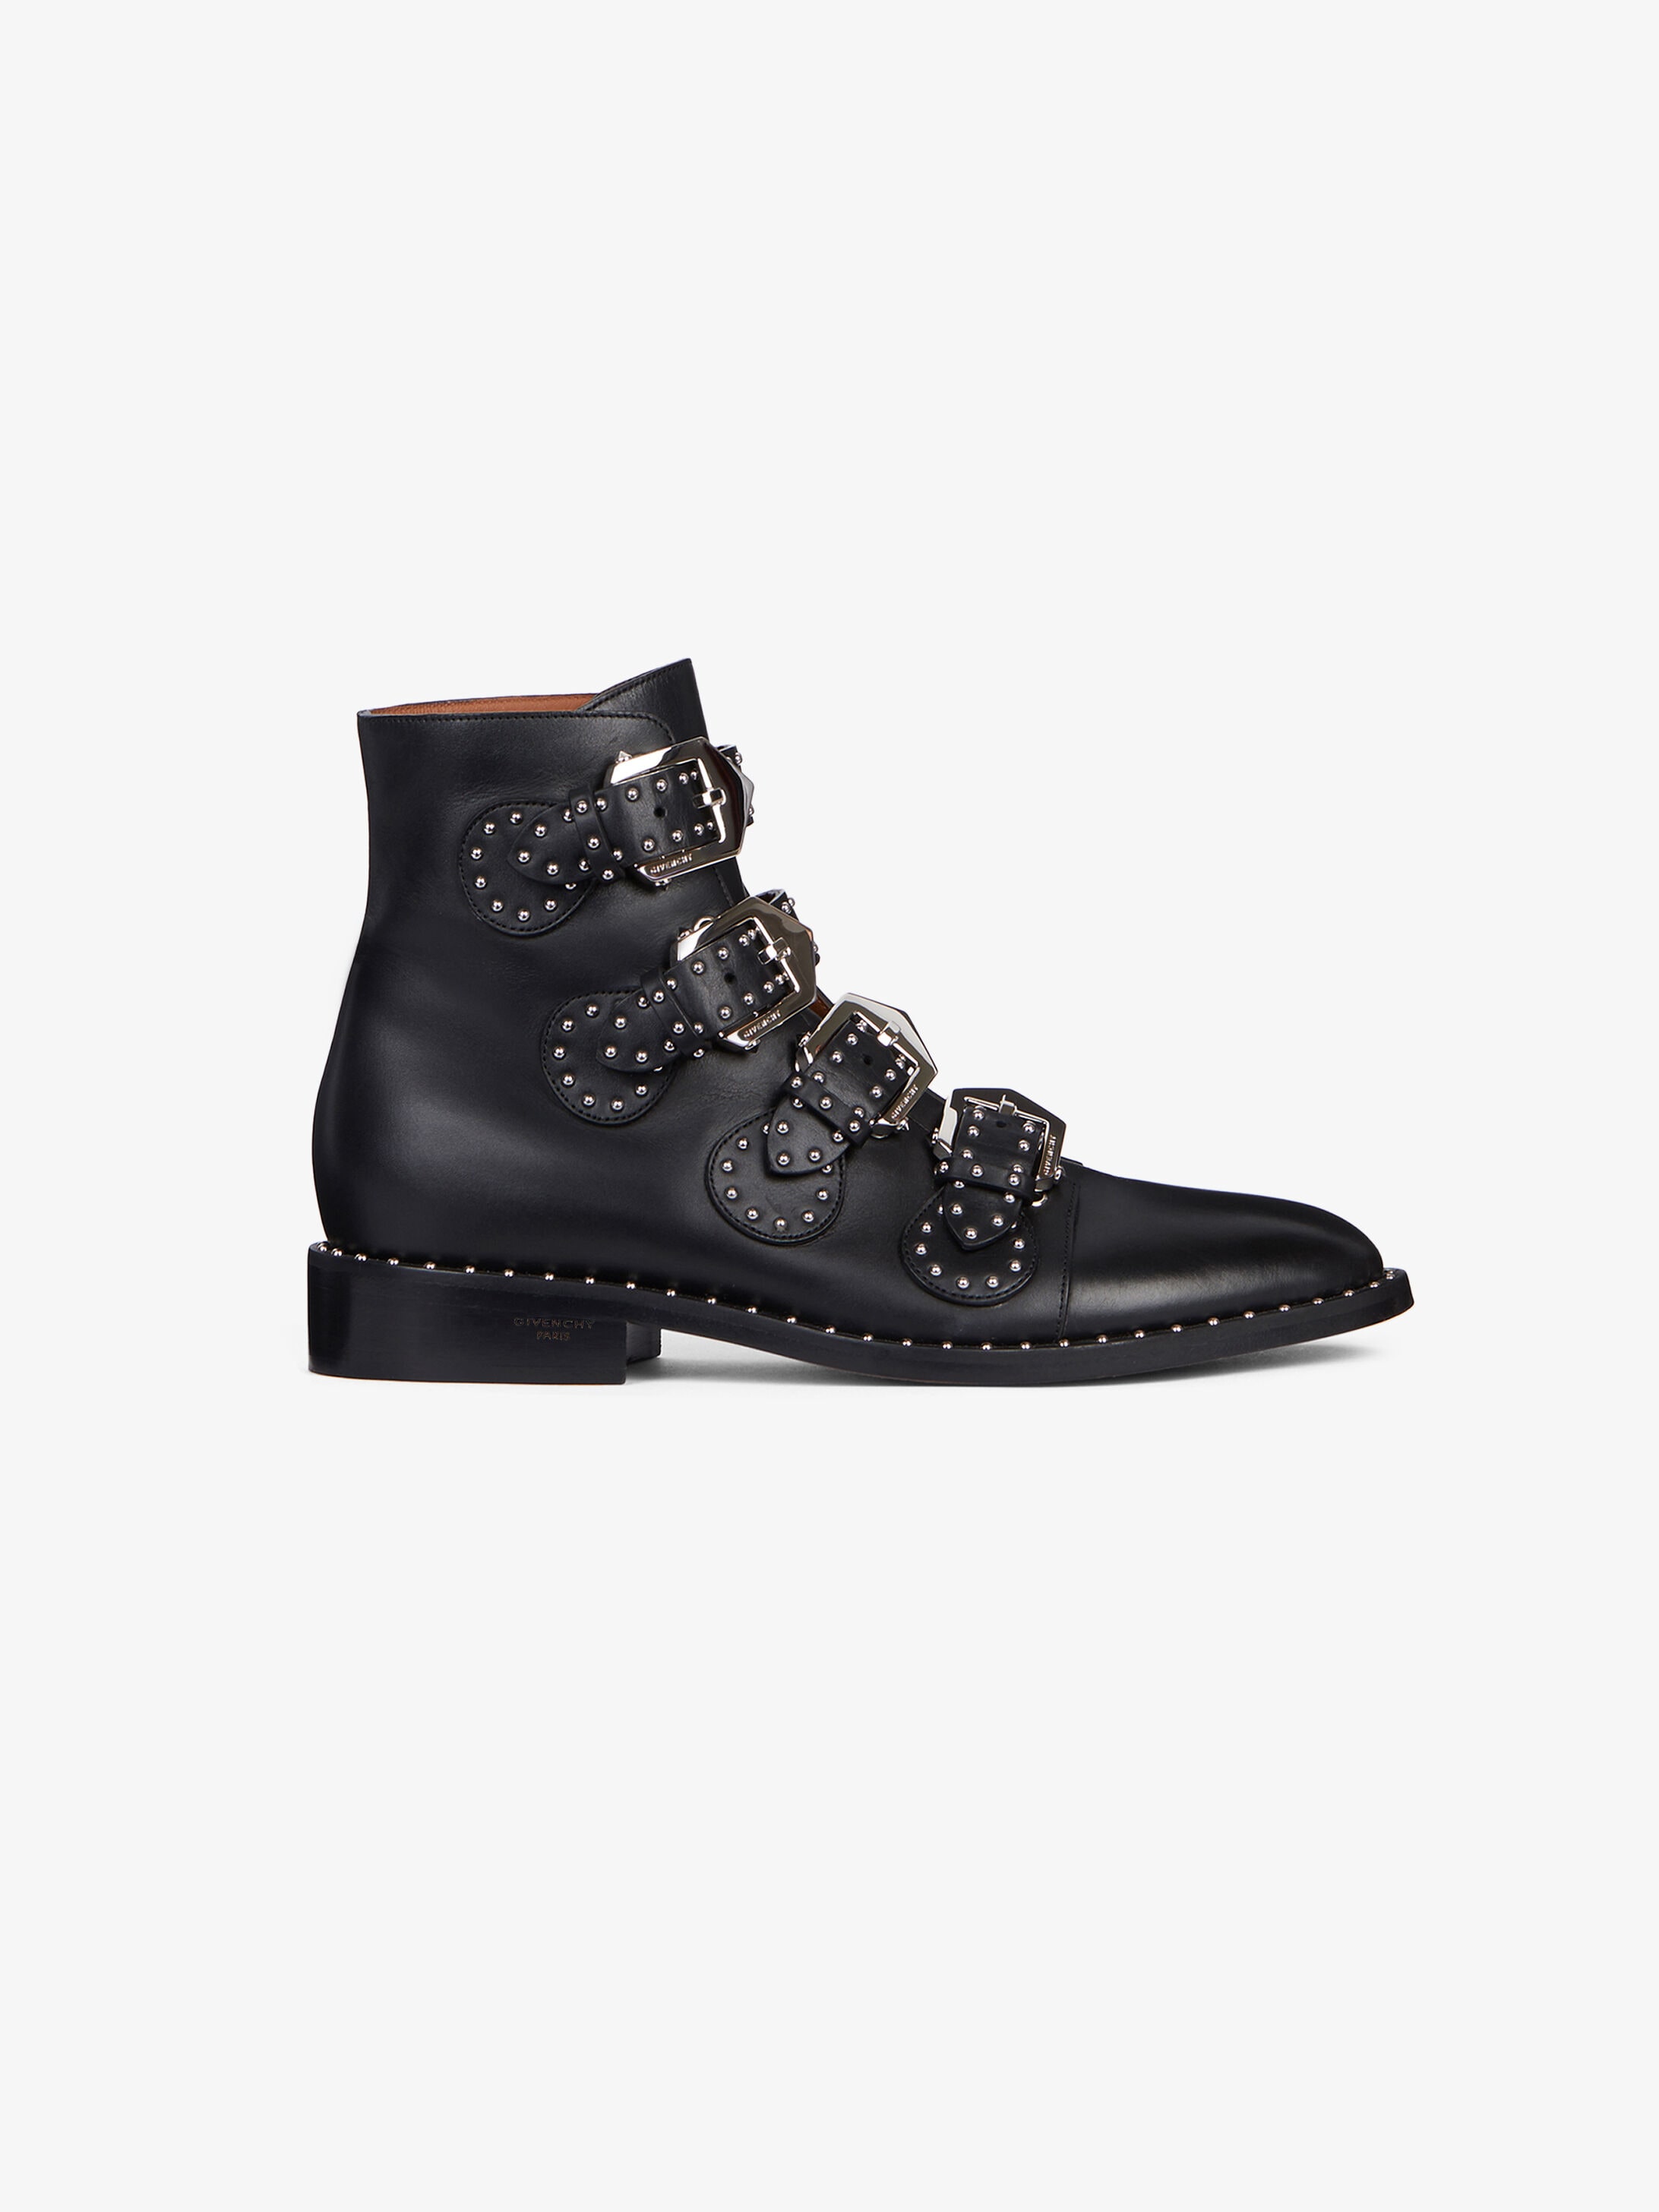 givenchy boot sale